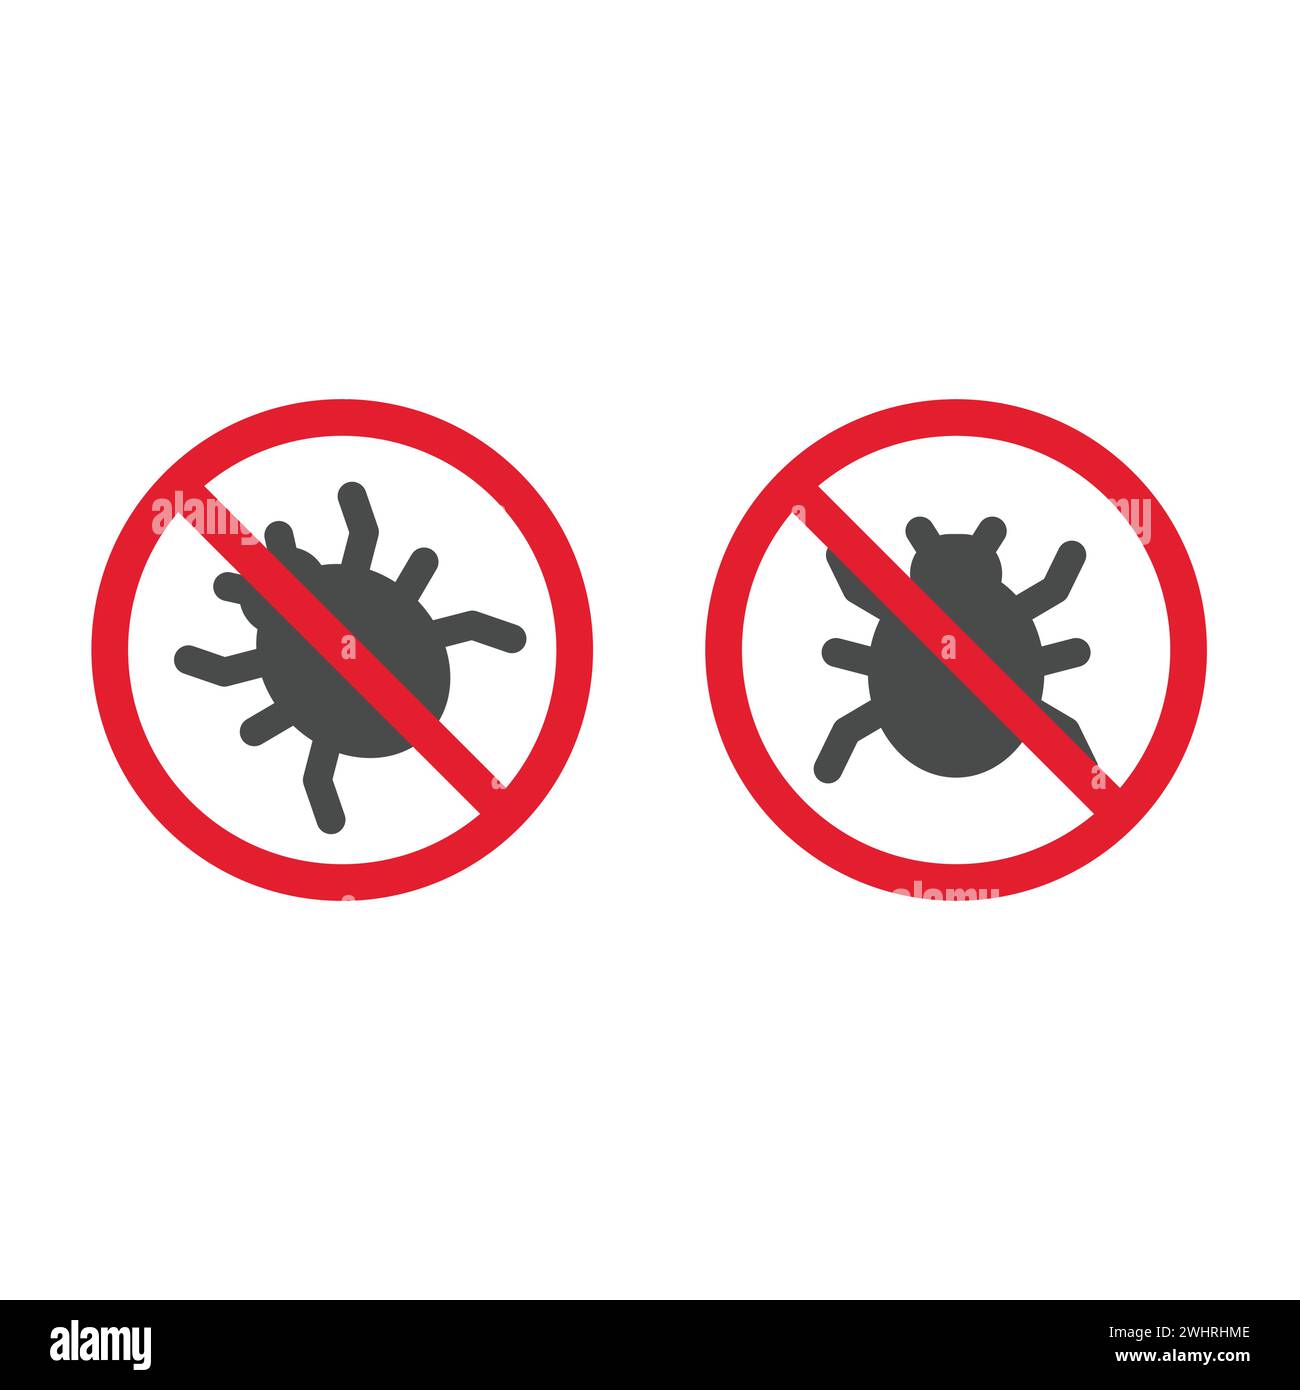 No bug red prohibition sign. Insecticide repellent or pesticide, no bugs icon. Stock Vector